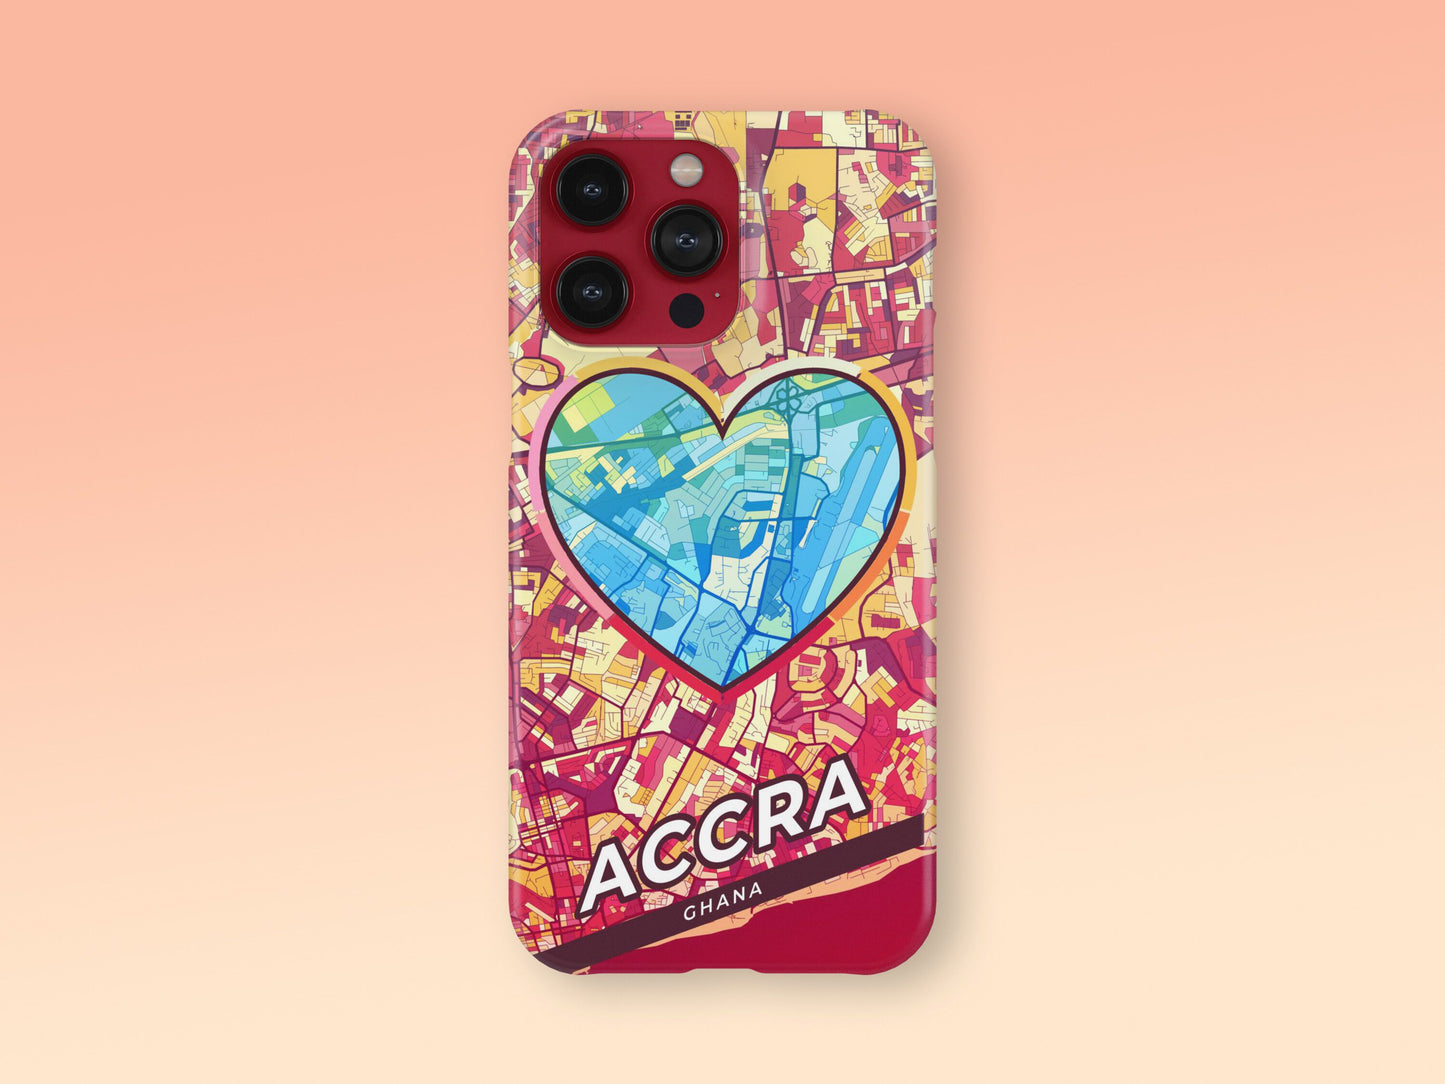 Accra Ghana slim phone case with colorful icon. Birthday, wedding or housewarming gift. Couple match cases. 2